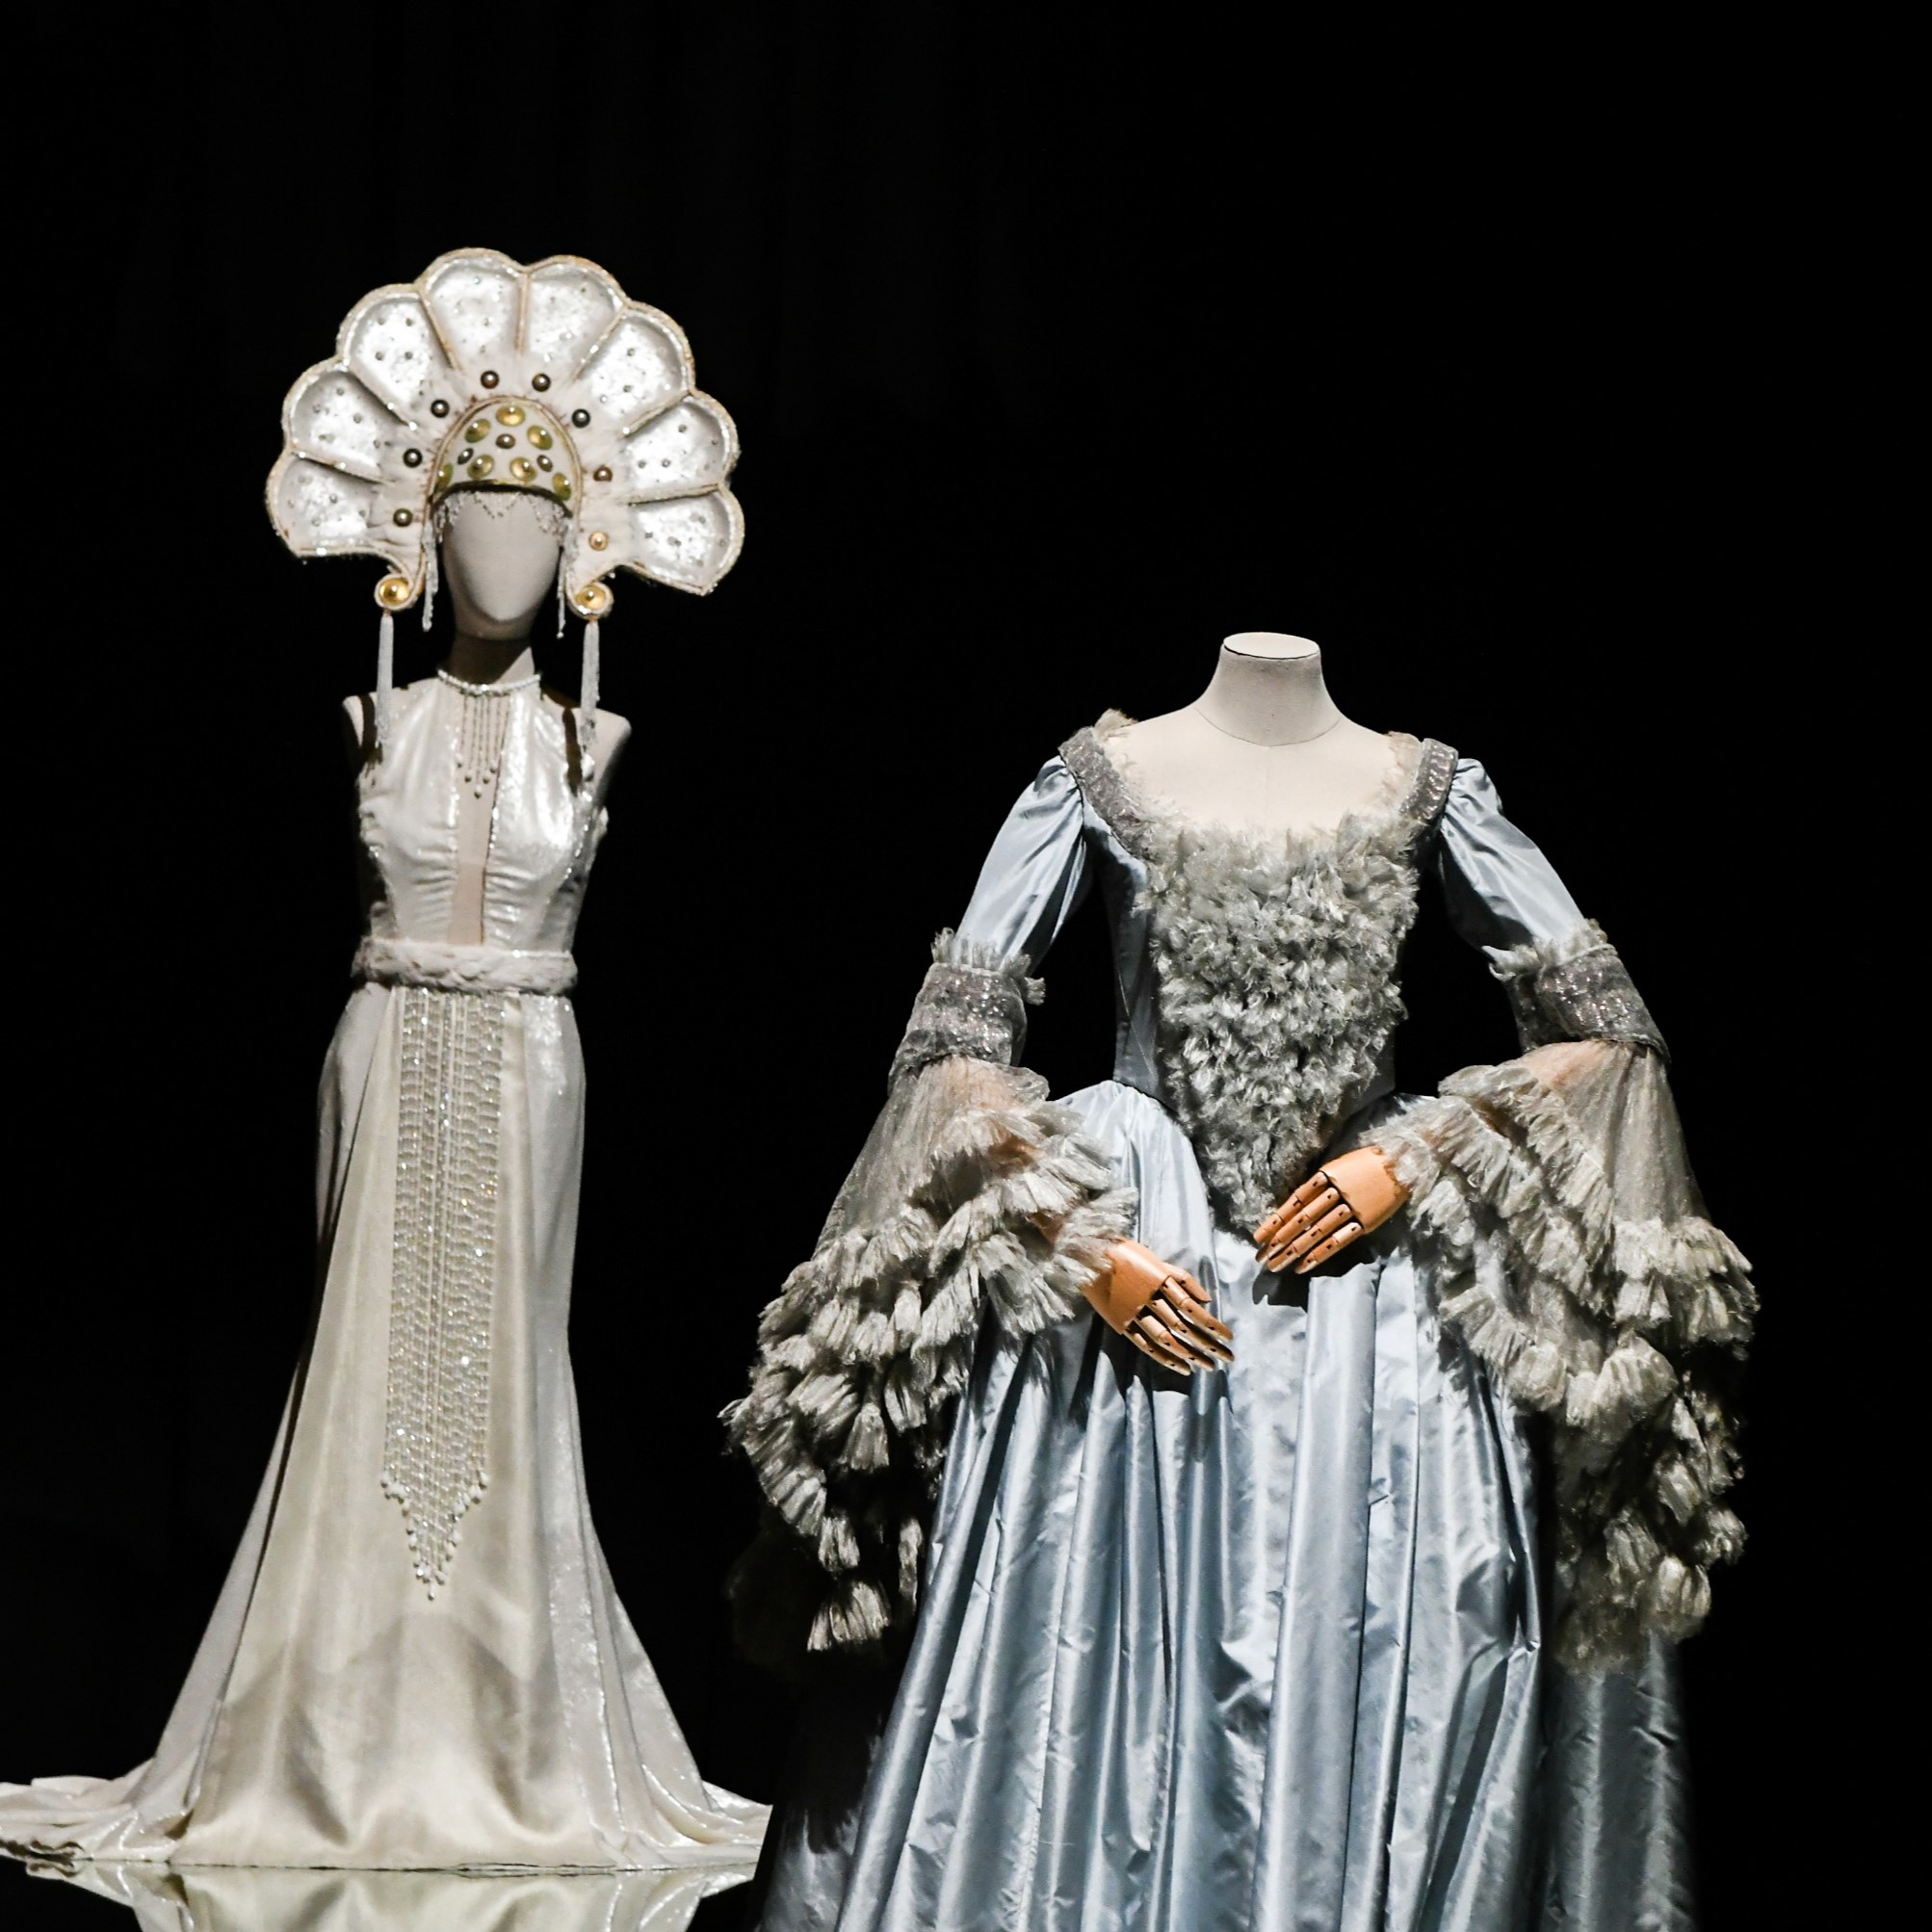 Beauty Changes. One hundred years of Italian Fashion and Costume